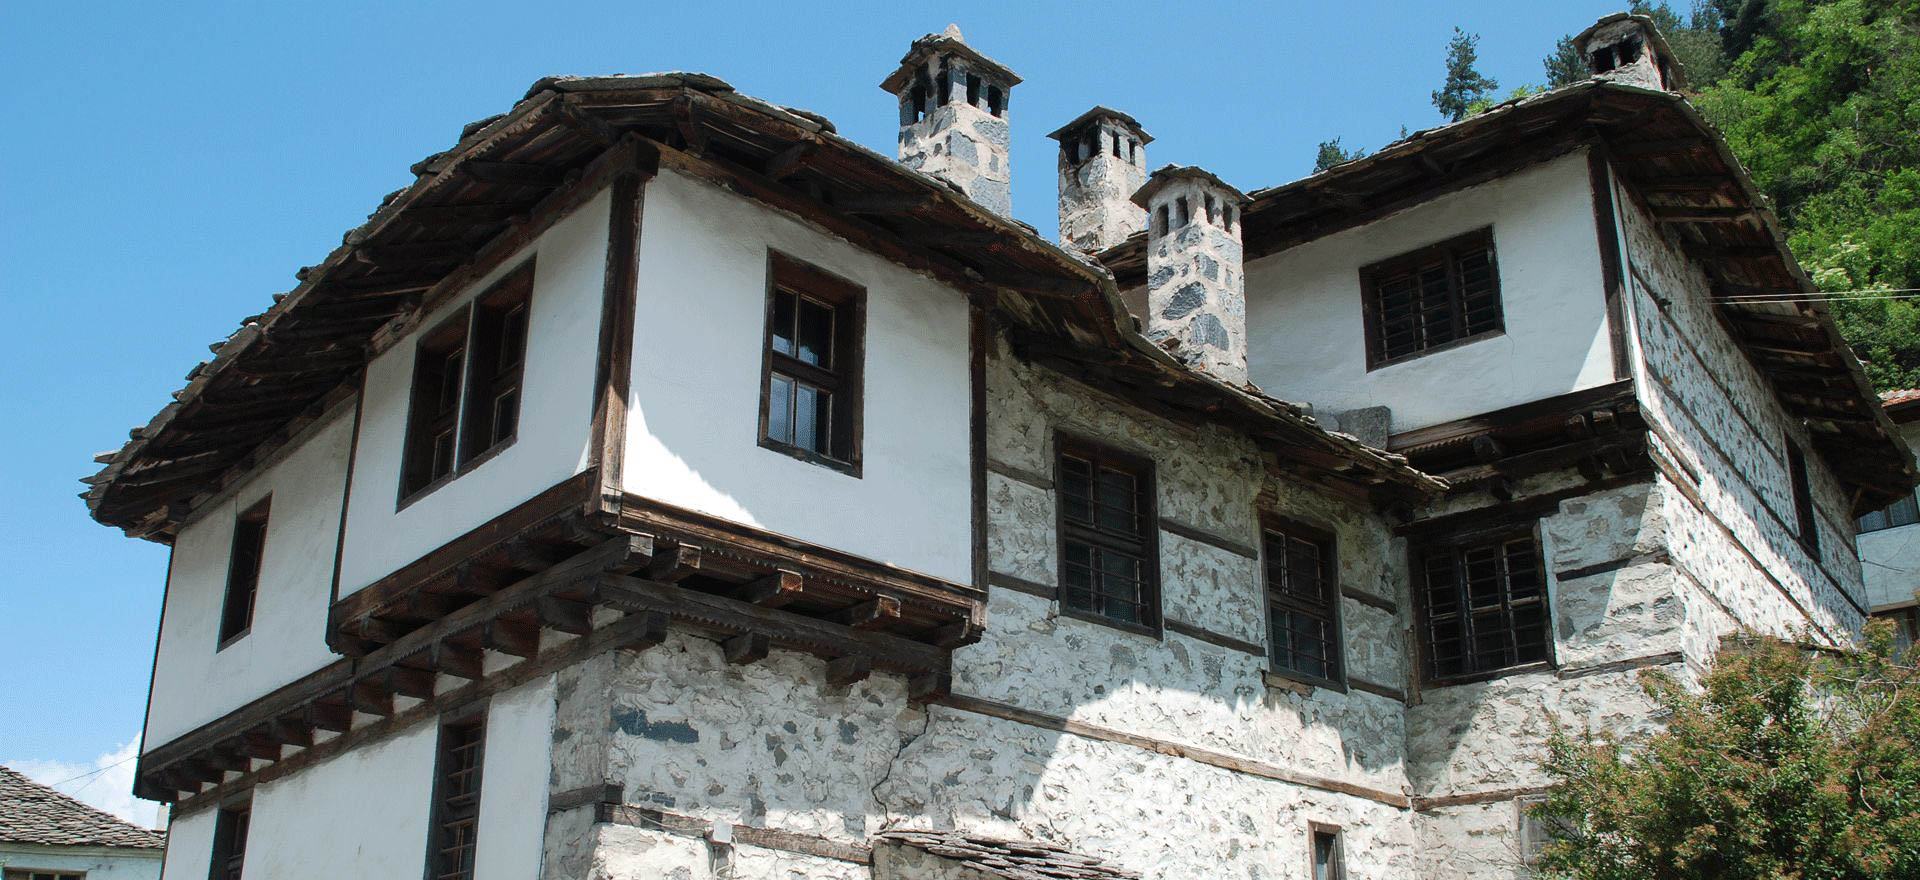 Traditional architecture in mountain village - Bulgaria holidays